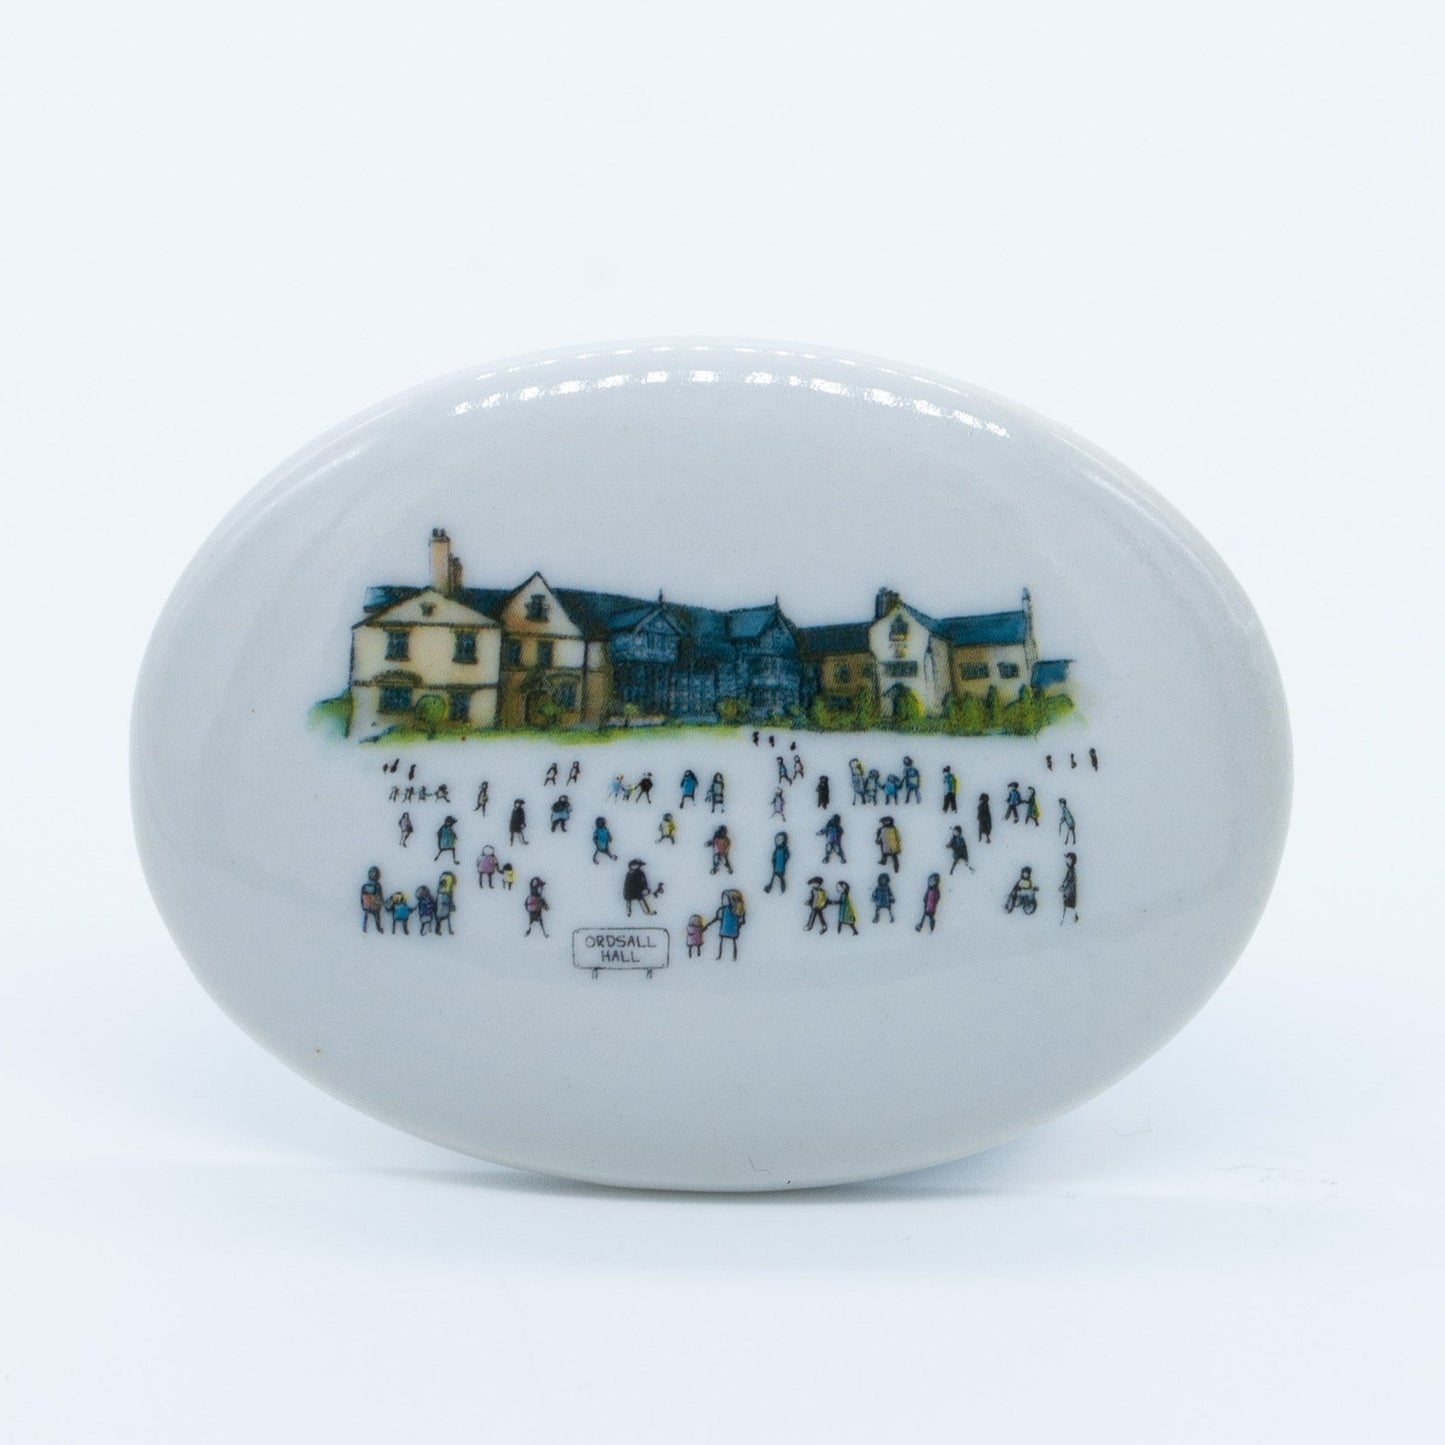 Ordsall Hall Ceramic Magnet by Foley Pottery